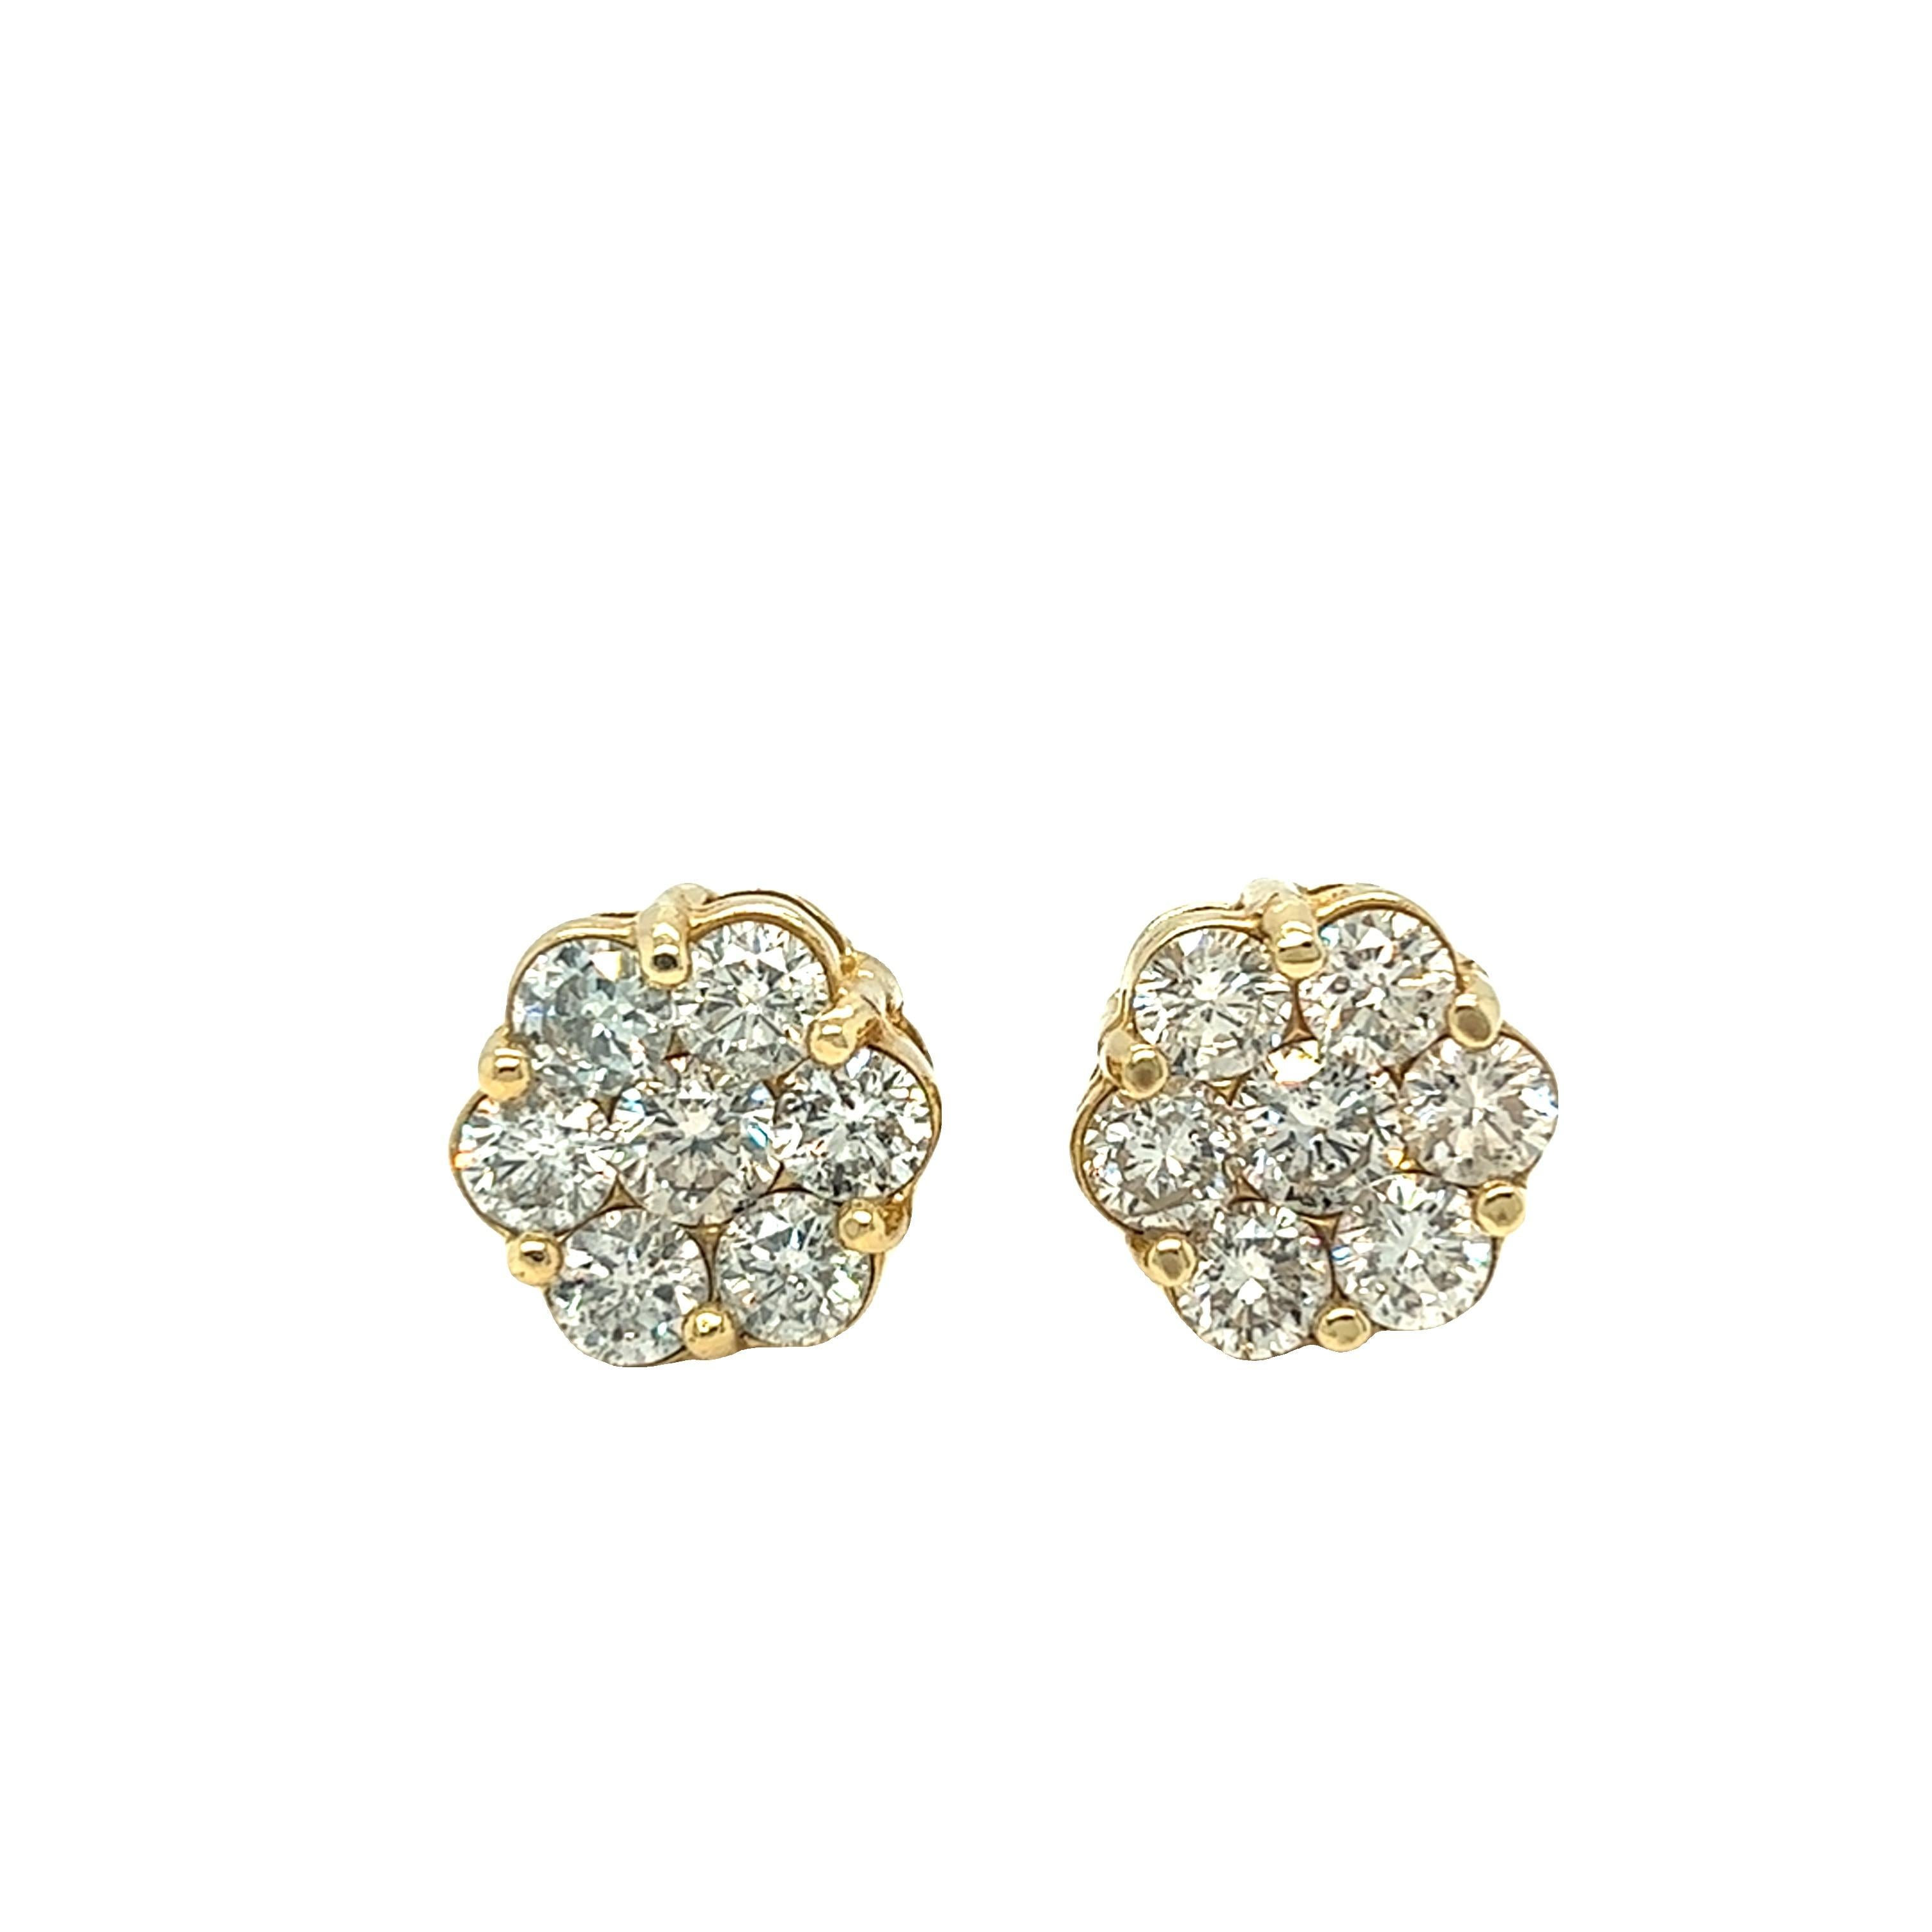 3.5 Carat Flower Cluster Round Diamond Earrings 14k Yellow Gold Screw Back In Excellent Condition For Sale In beverly hills, CA